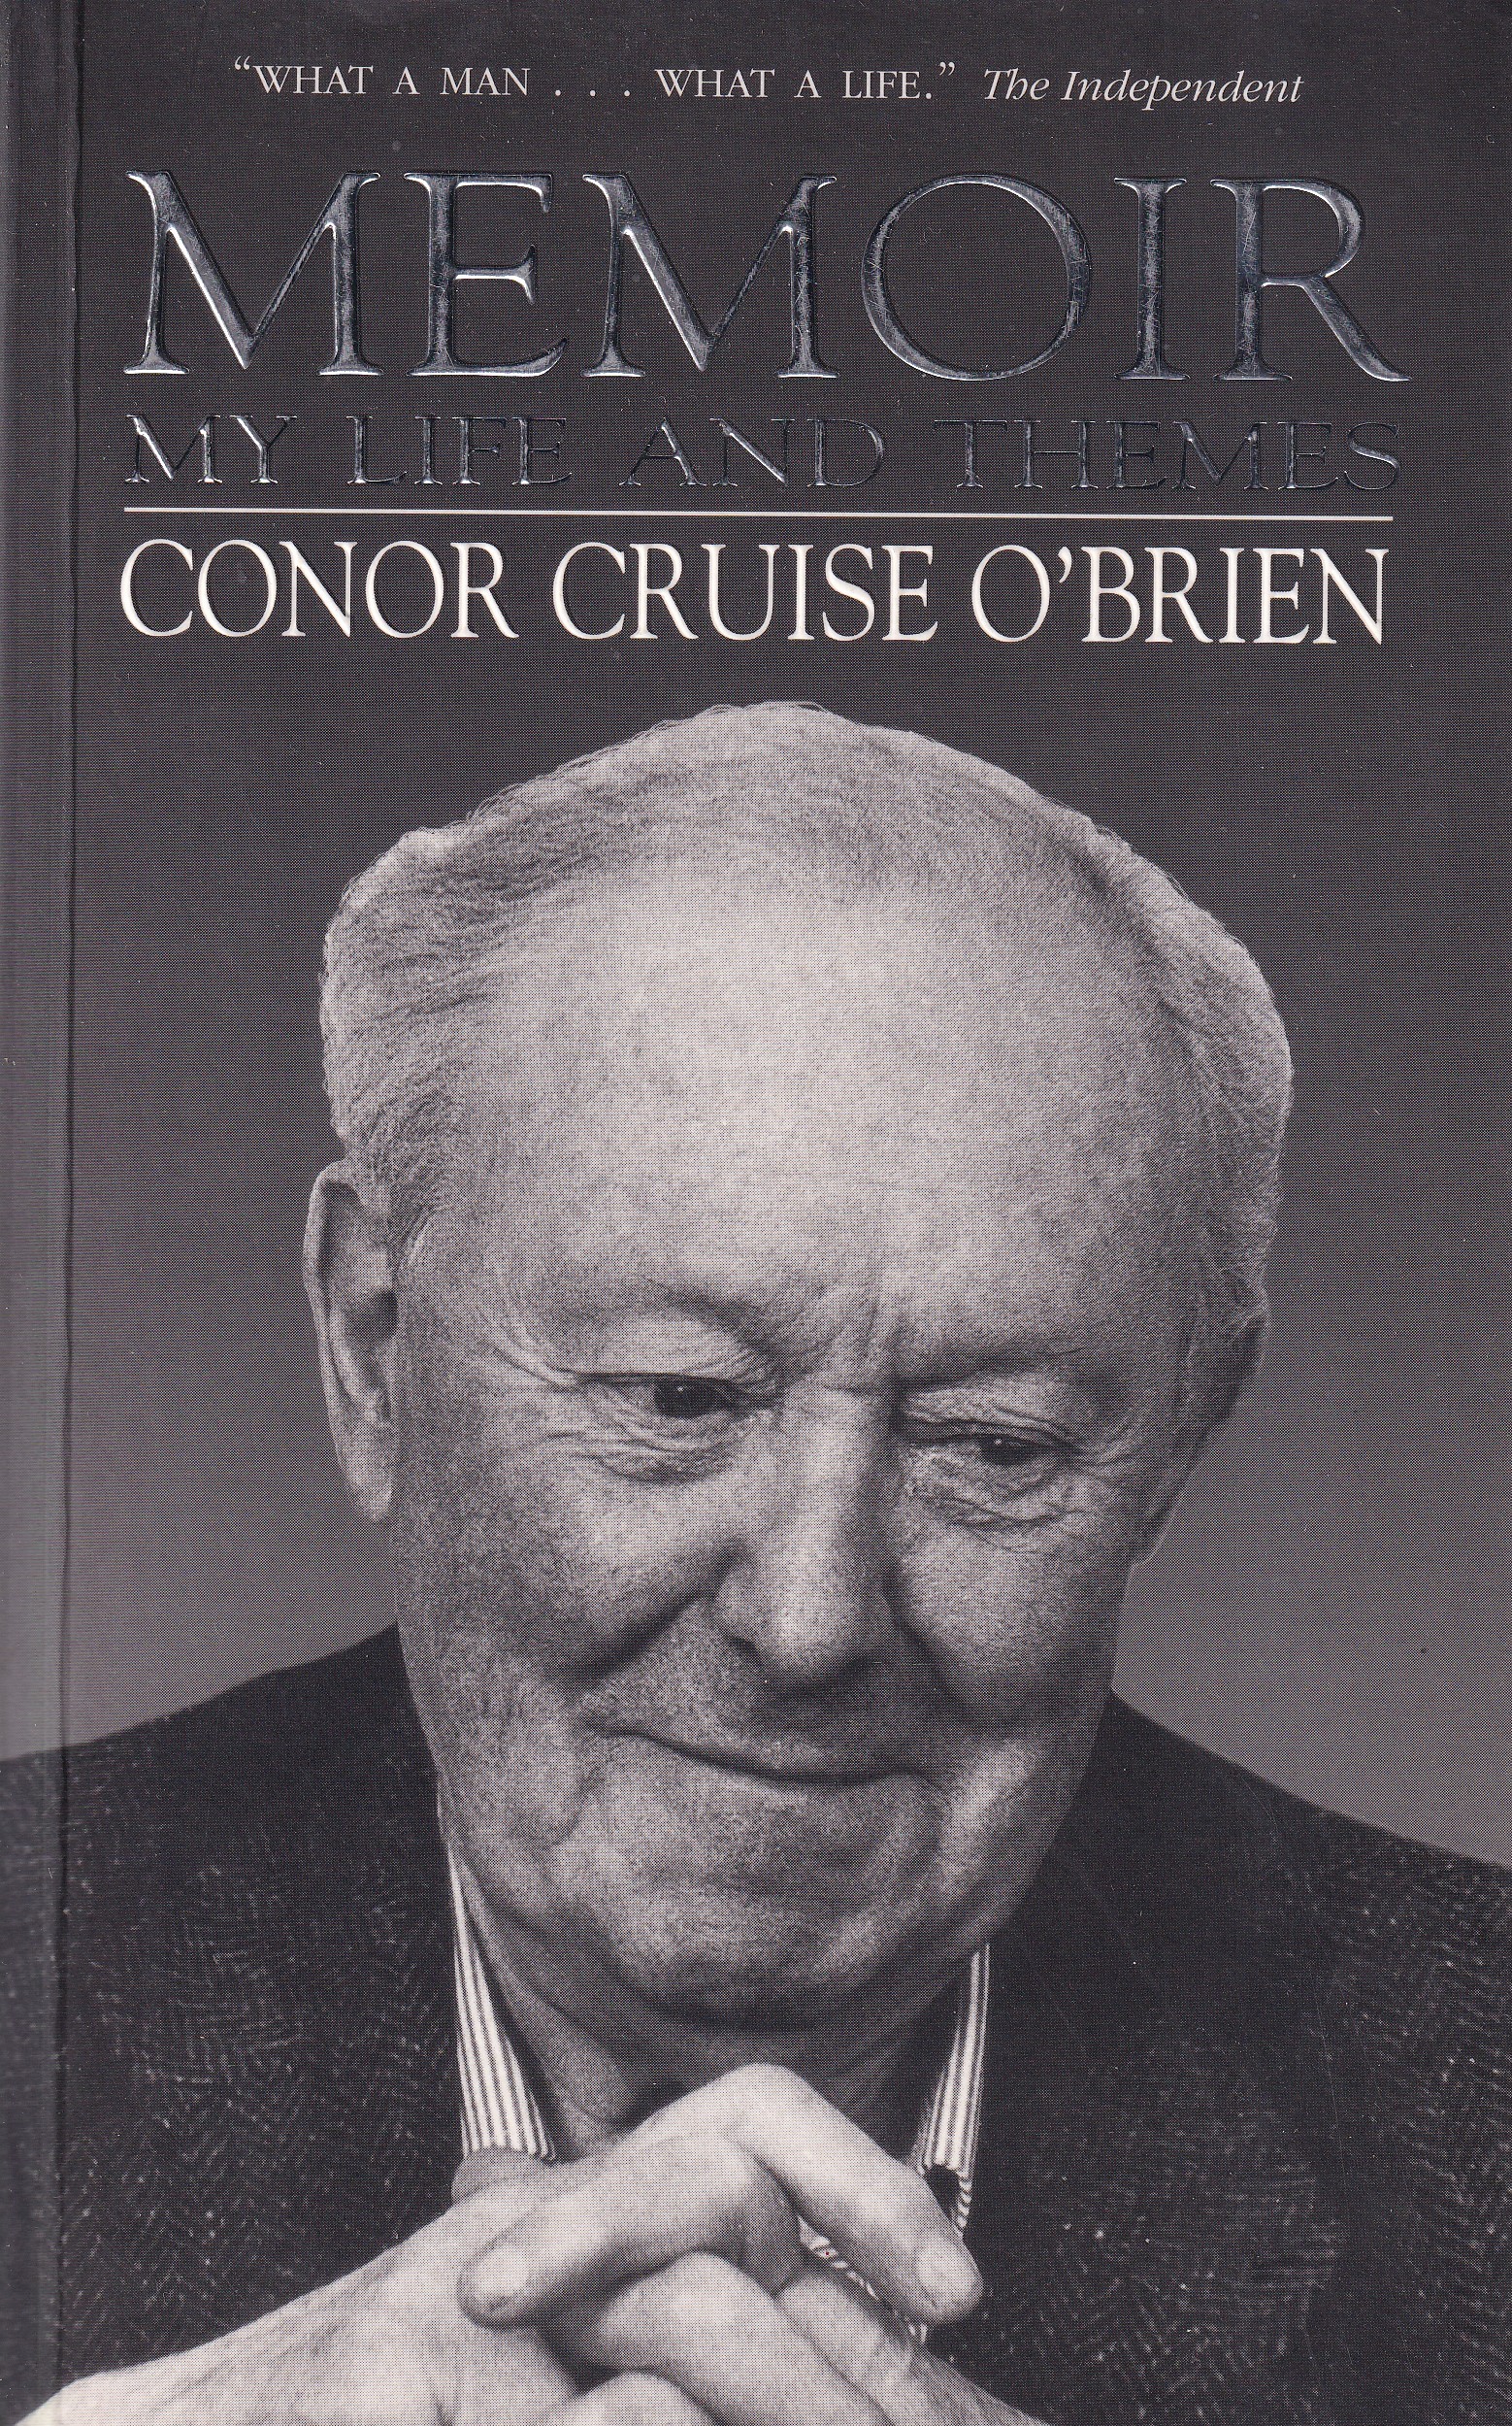 Memoir: My Life and Themes by Conor Cruise O'Brien